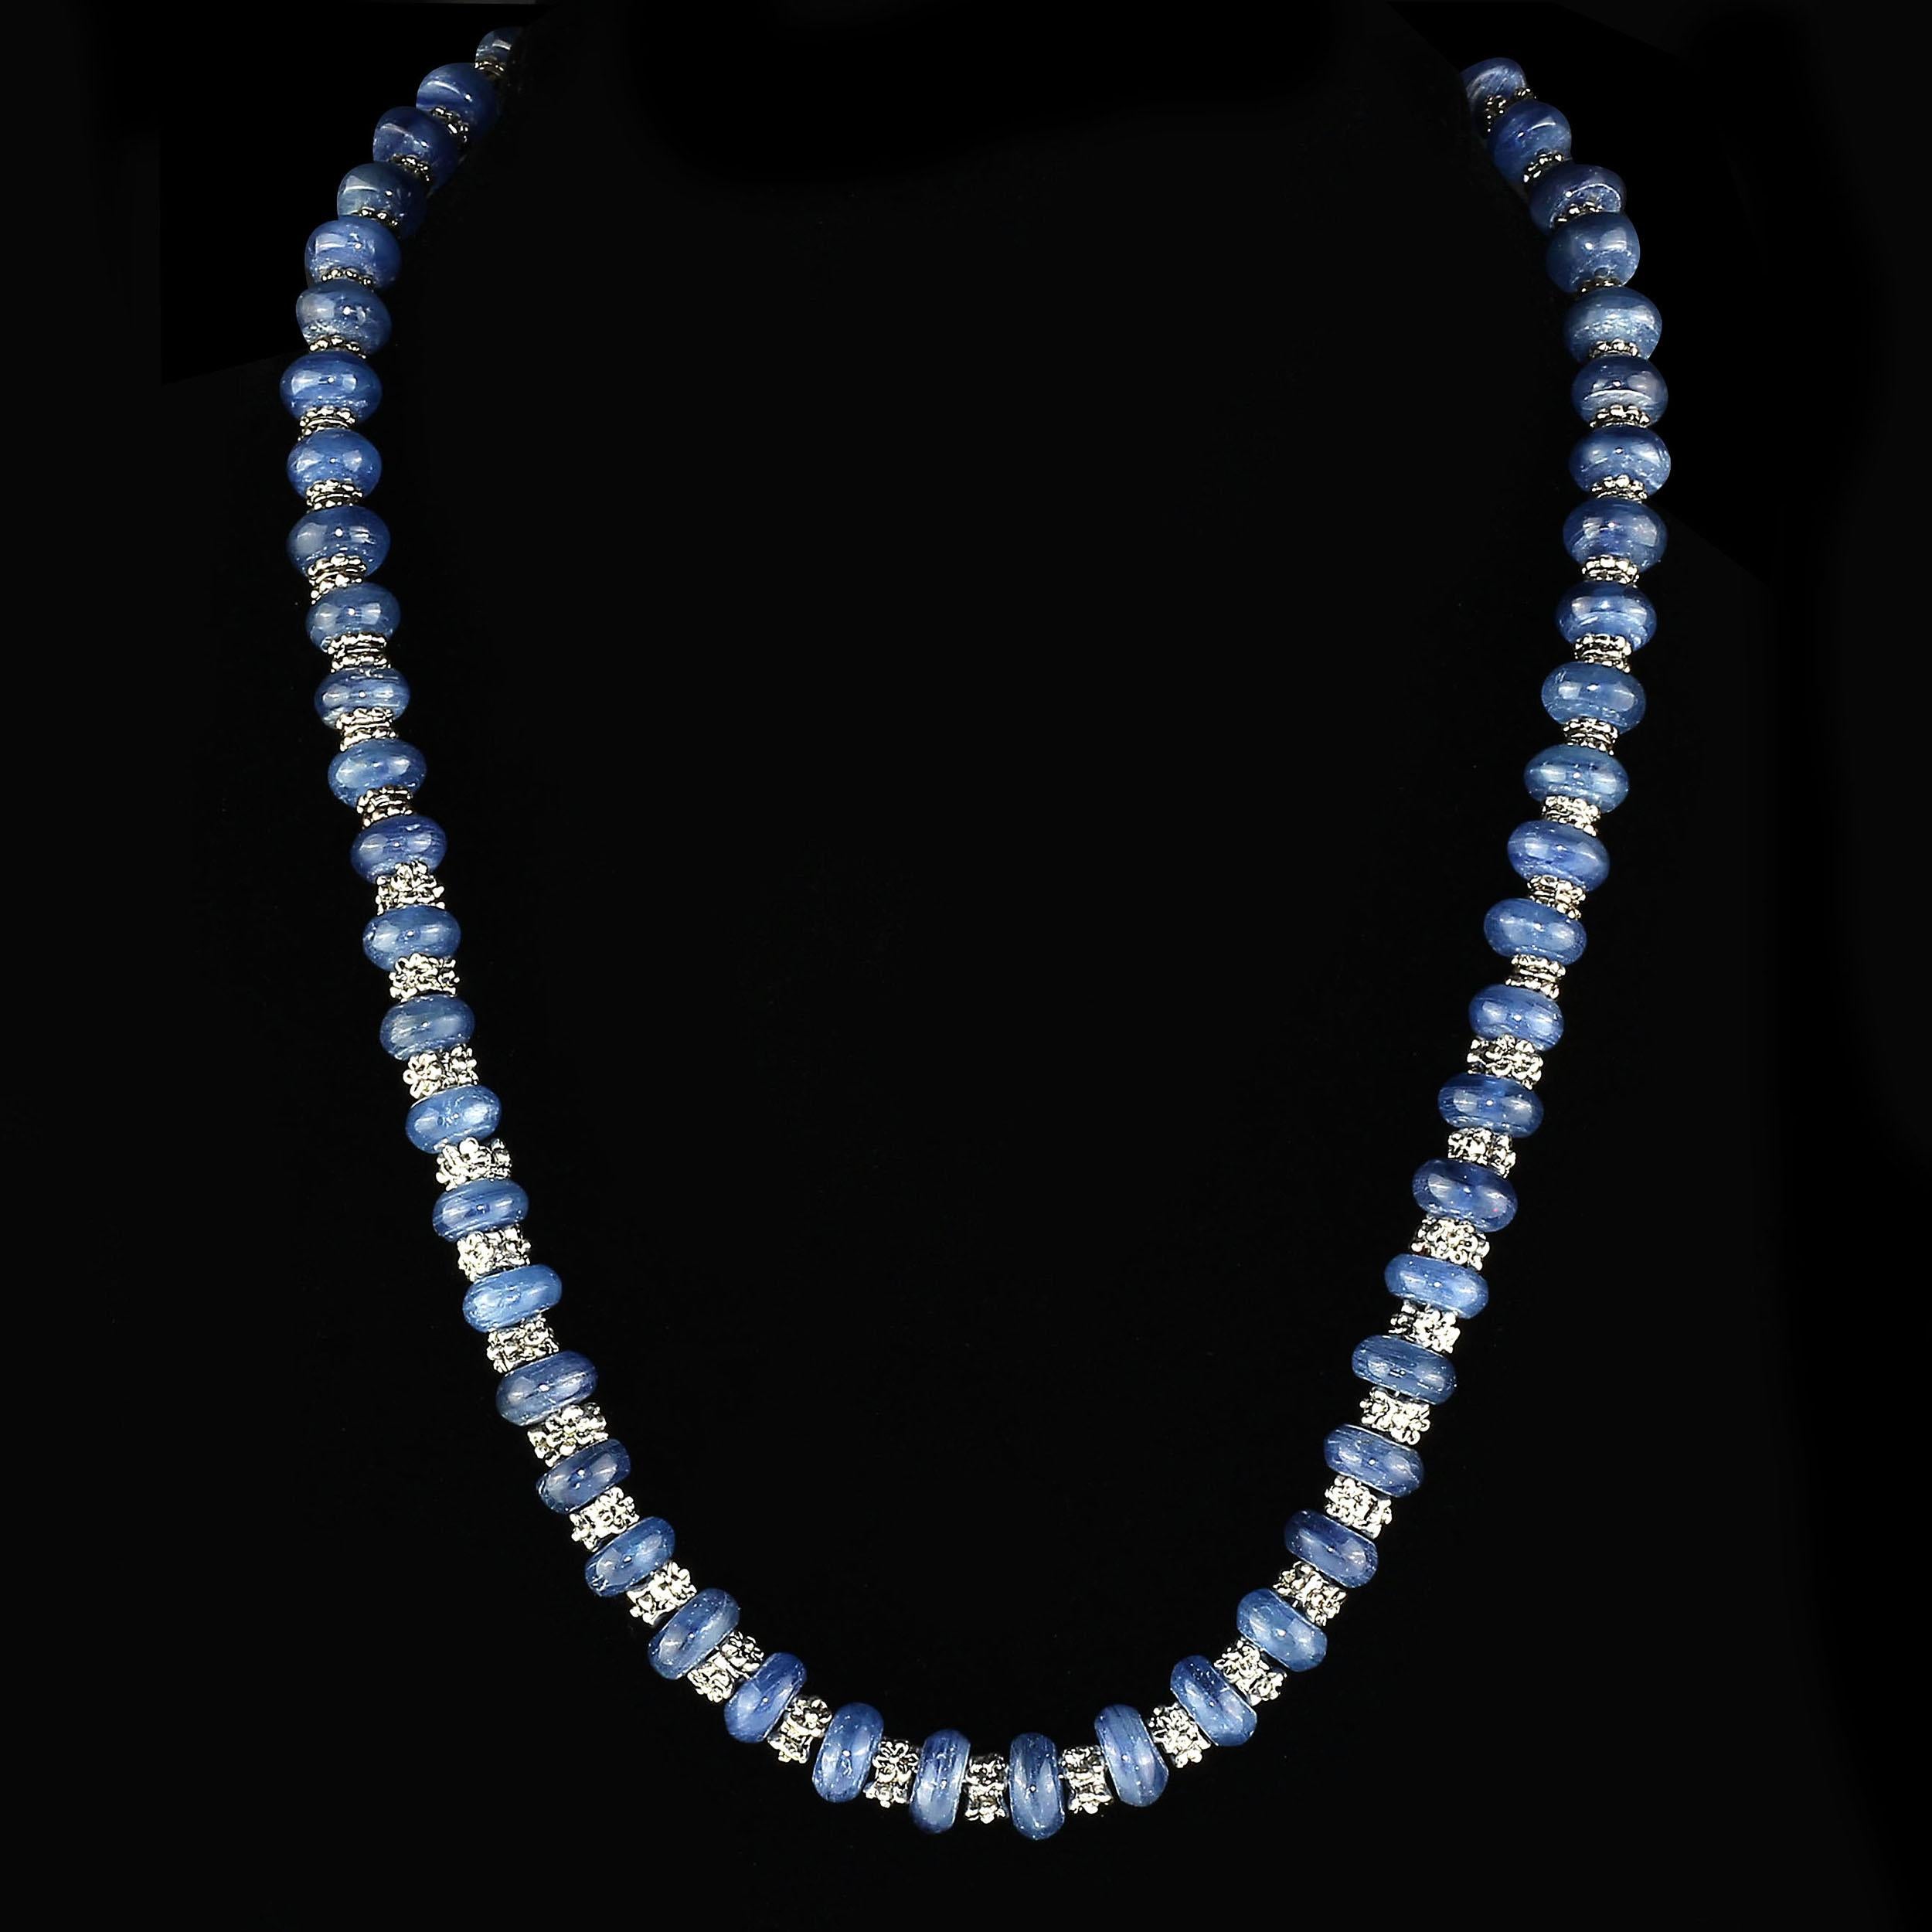 Bead  AJD Gorgeous Necklace of Blue Kyanite Alternating with Silver Bali